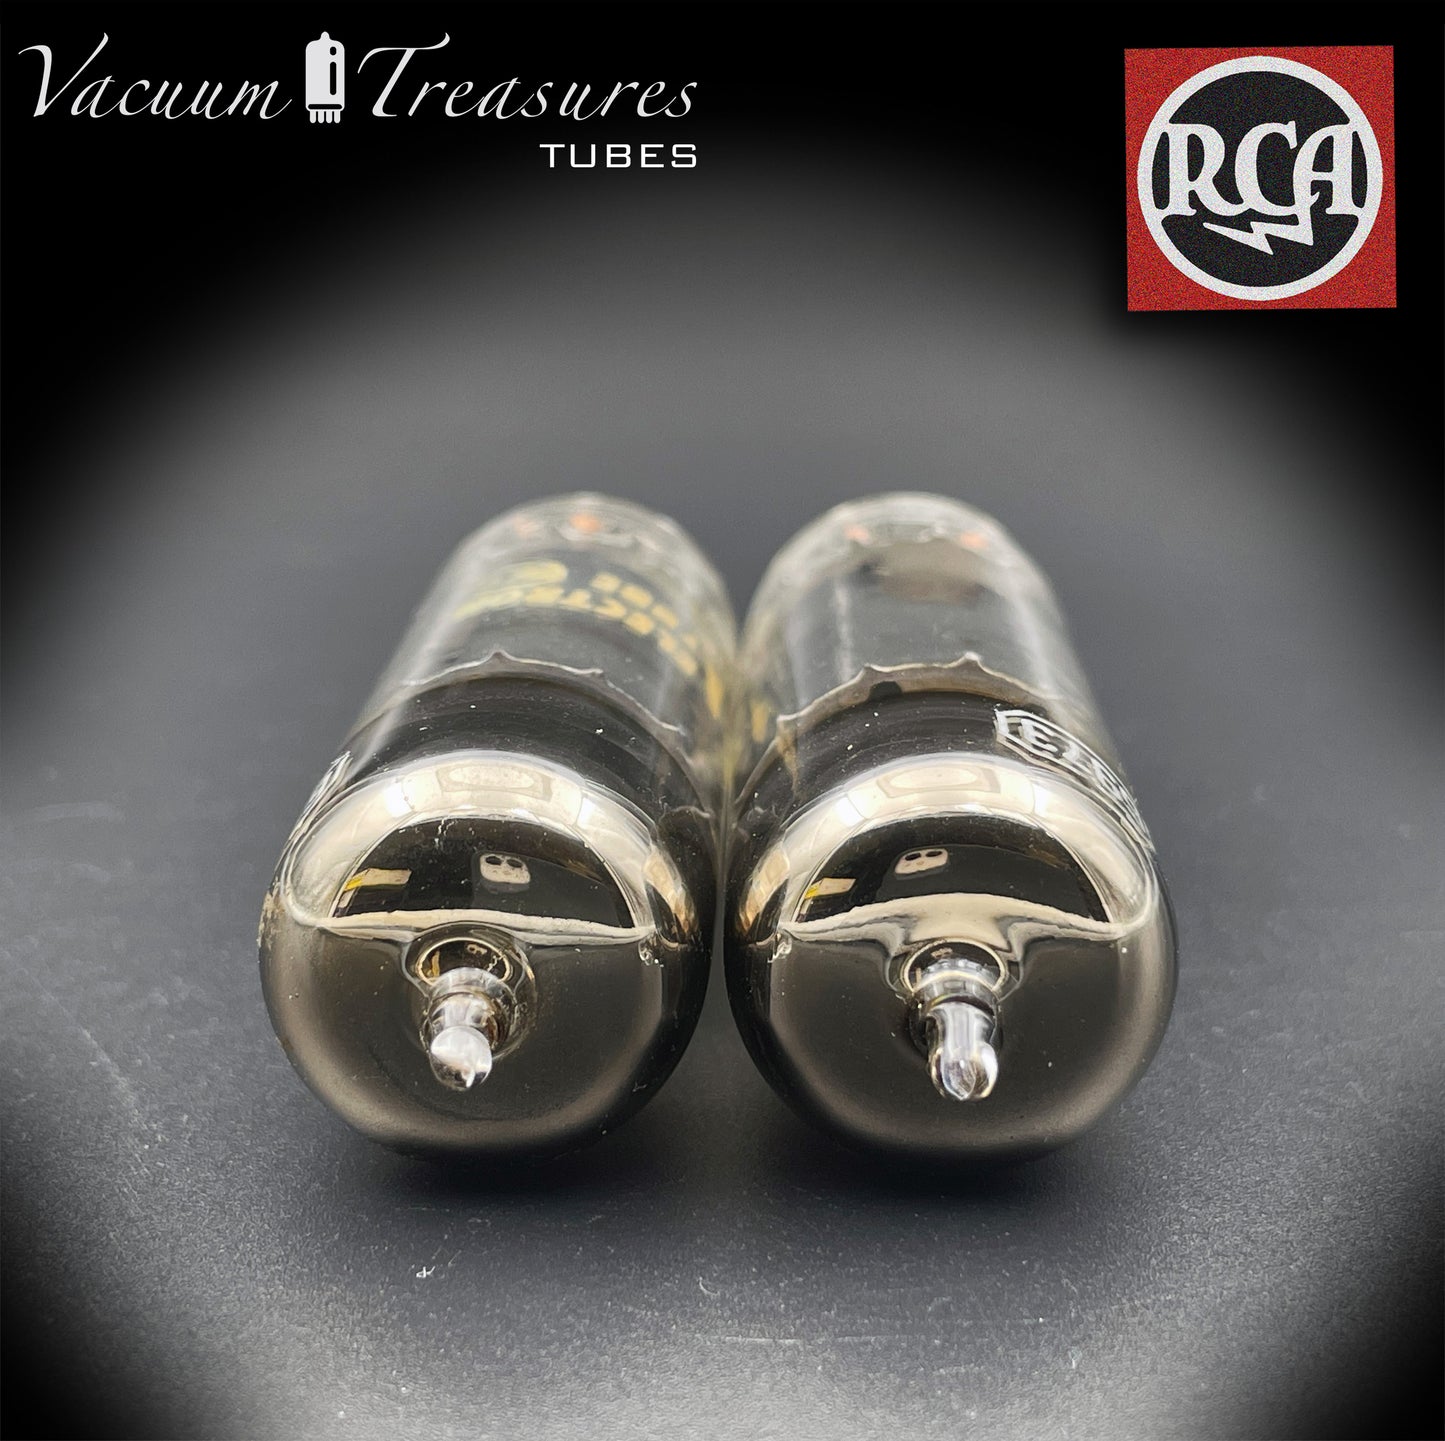 6973 RCA Black Plates Halo Getter Matched Pair Tubes Made in USA